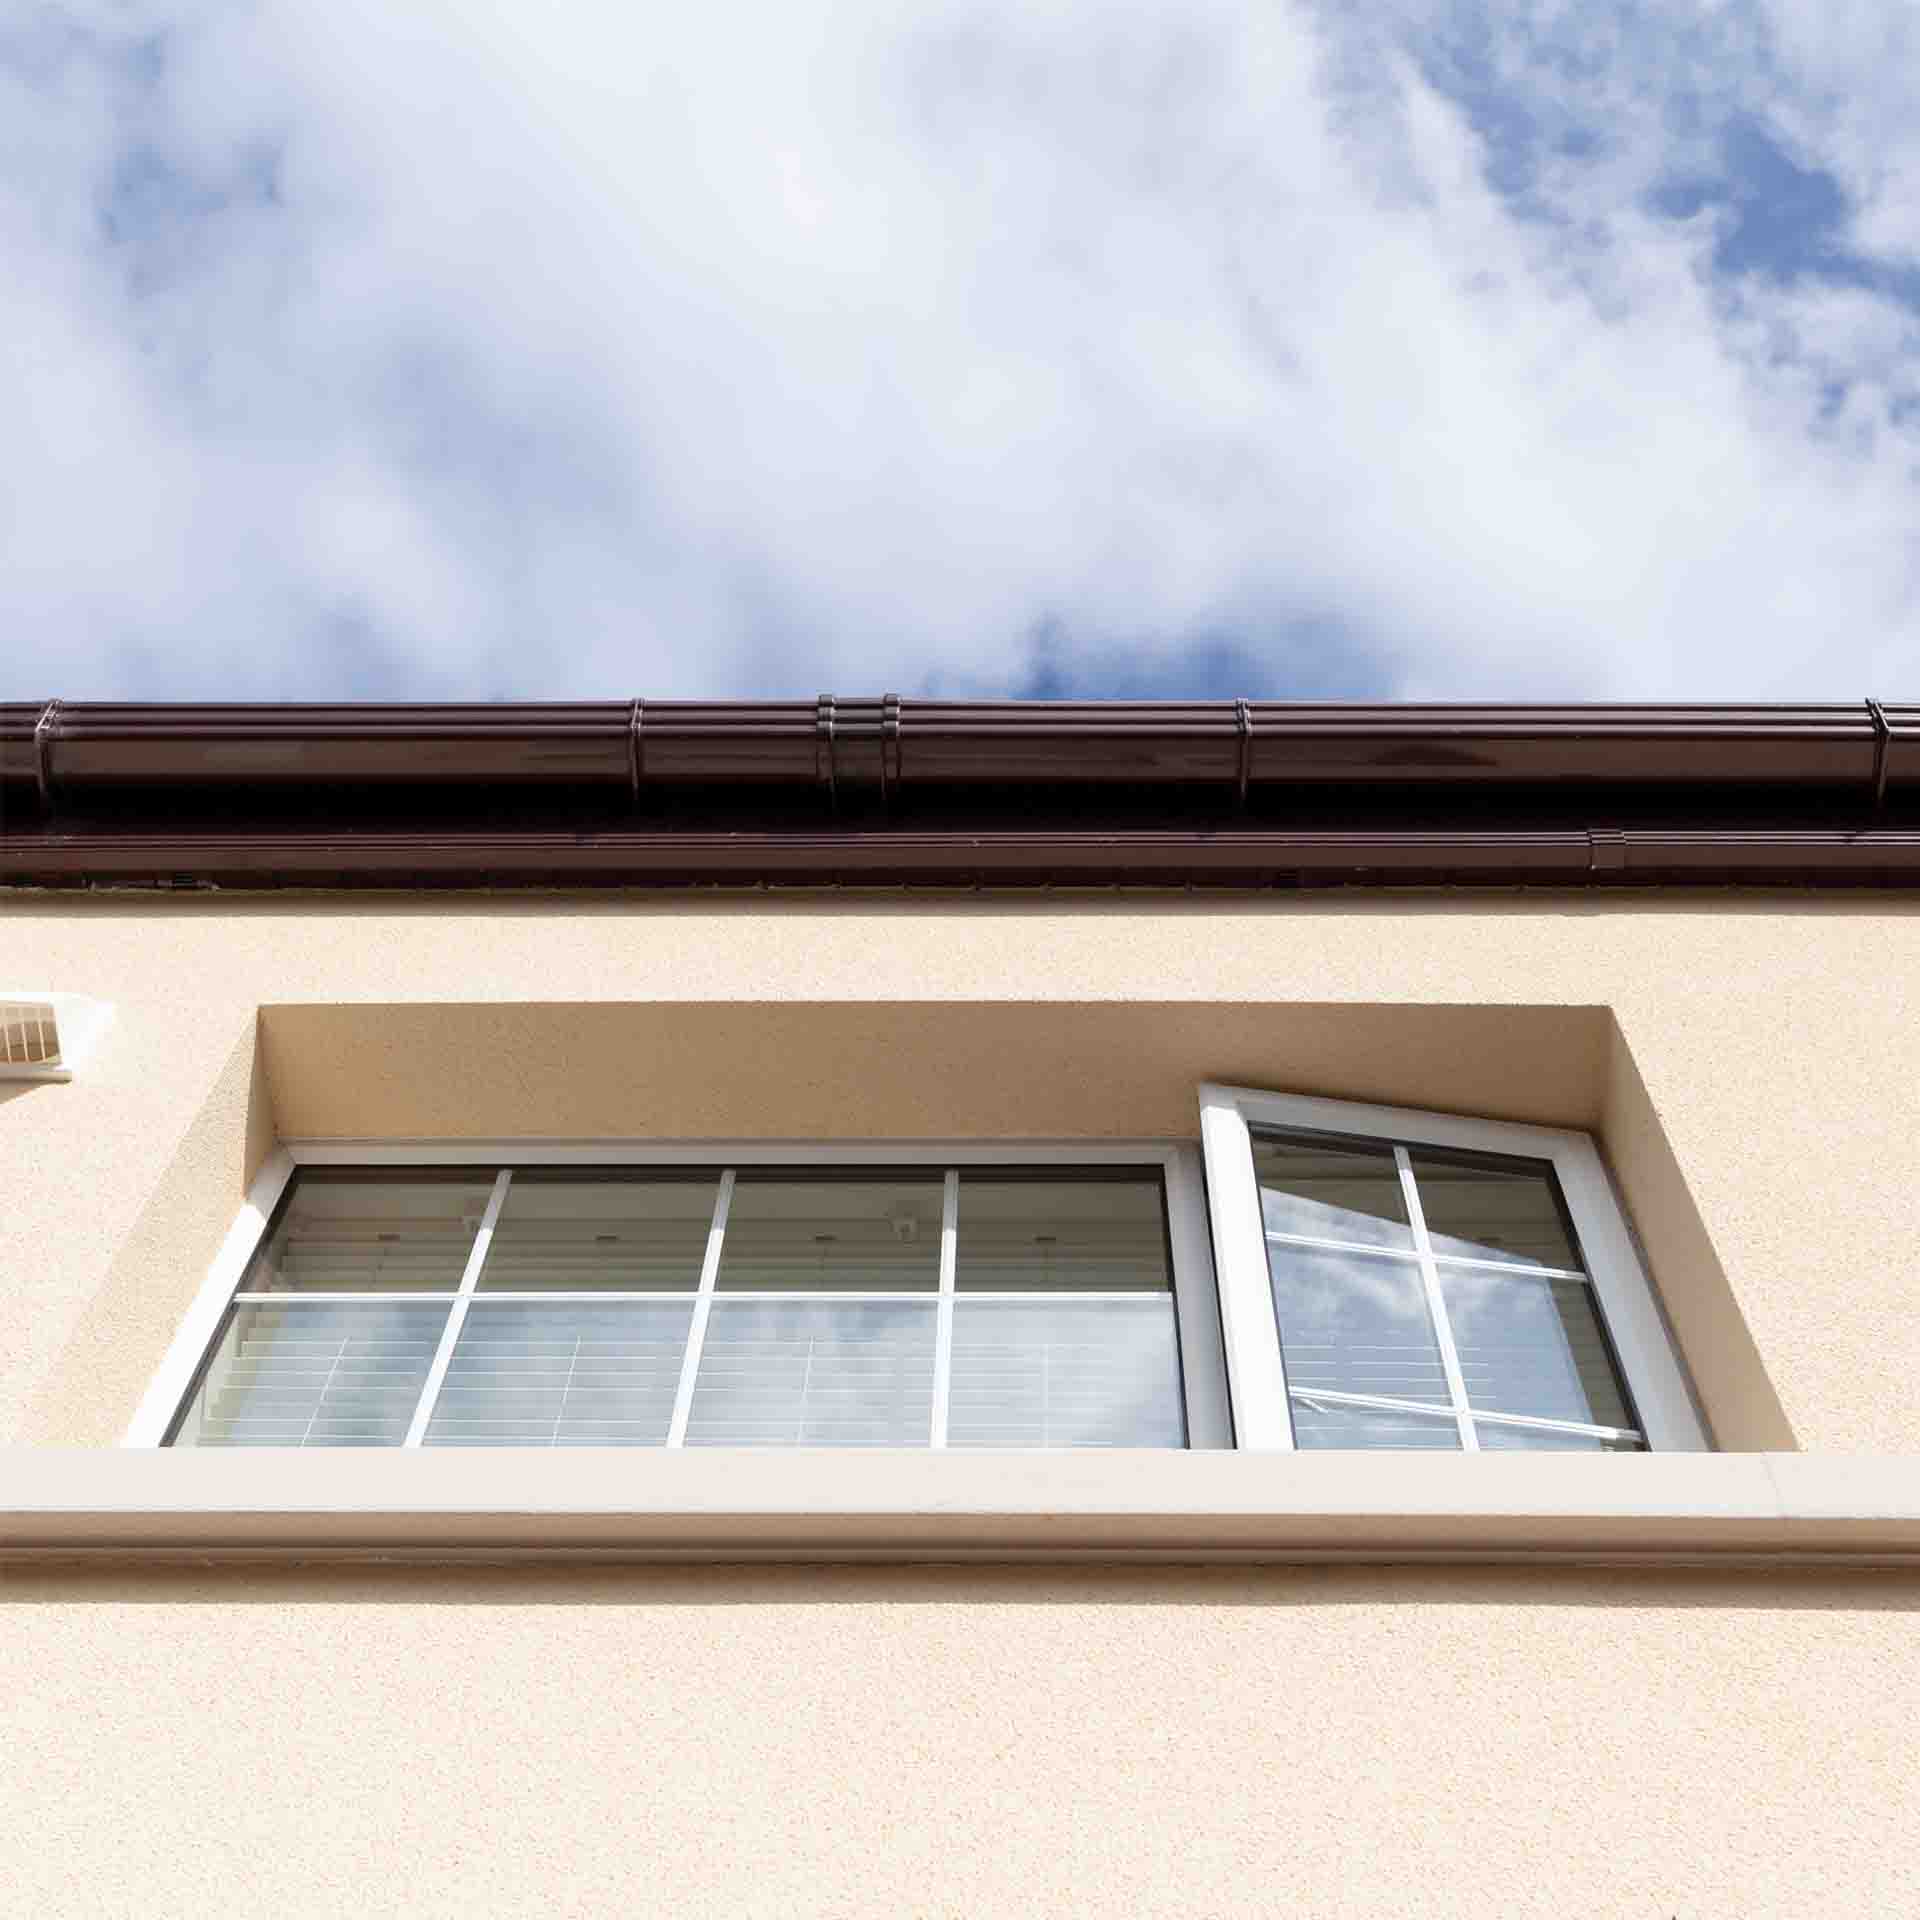 Example of a window replacement in a home that has external wall insulation.